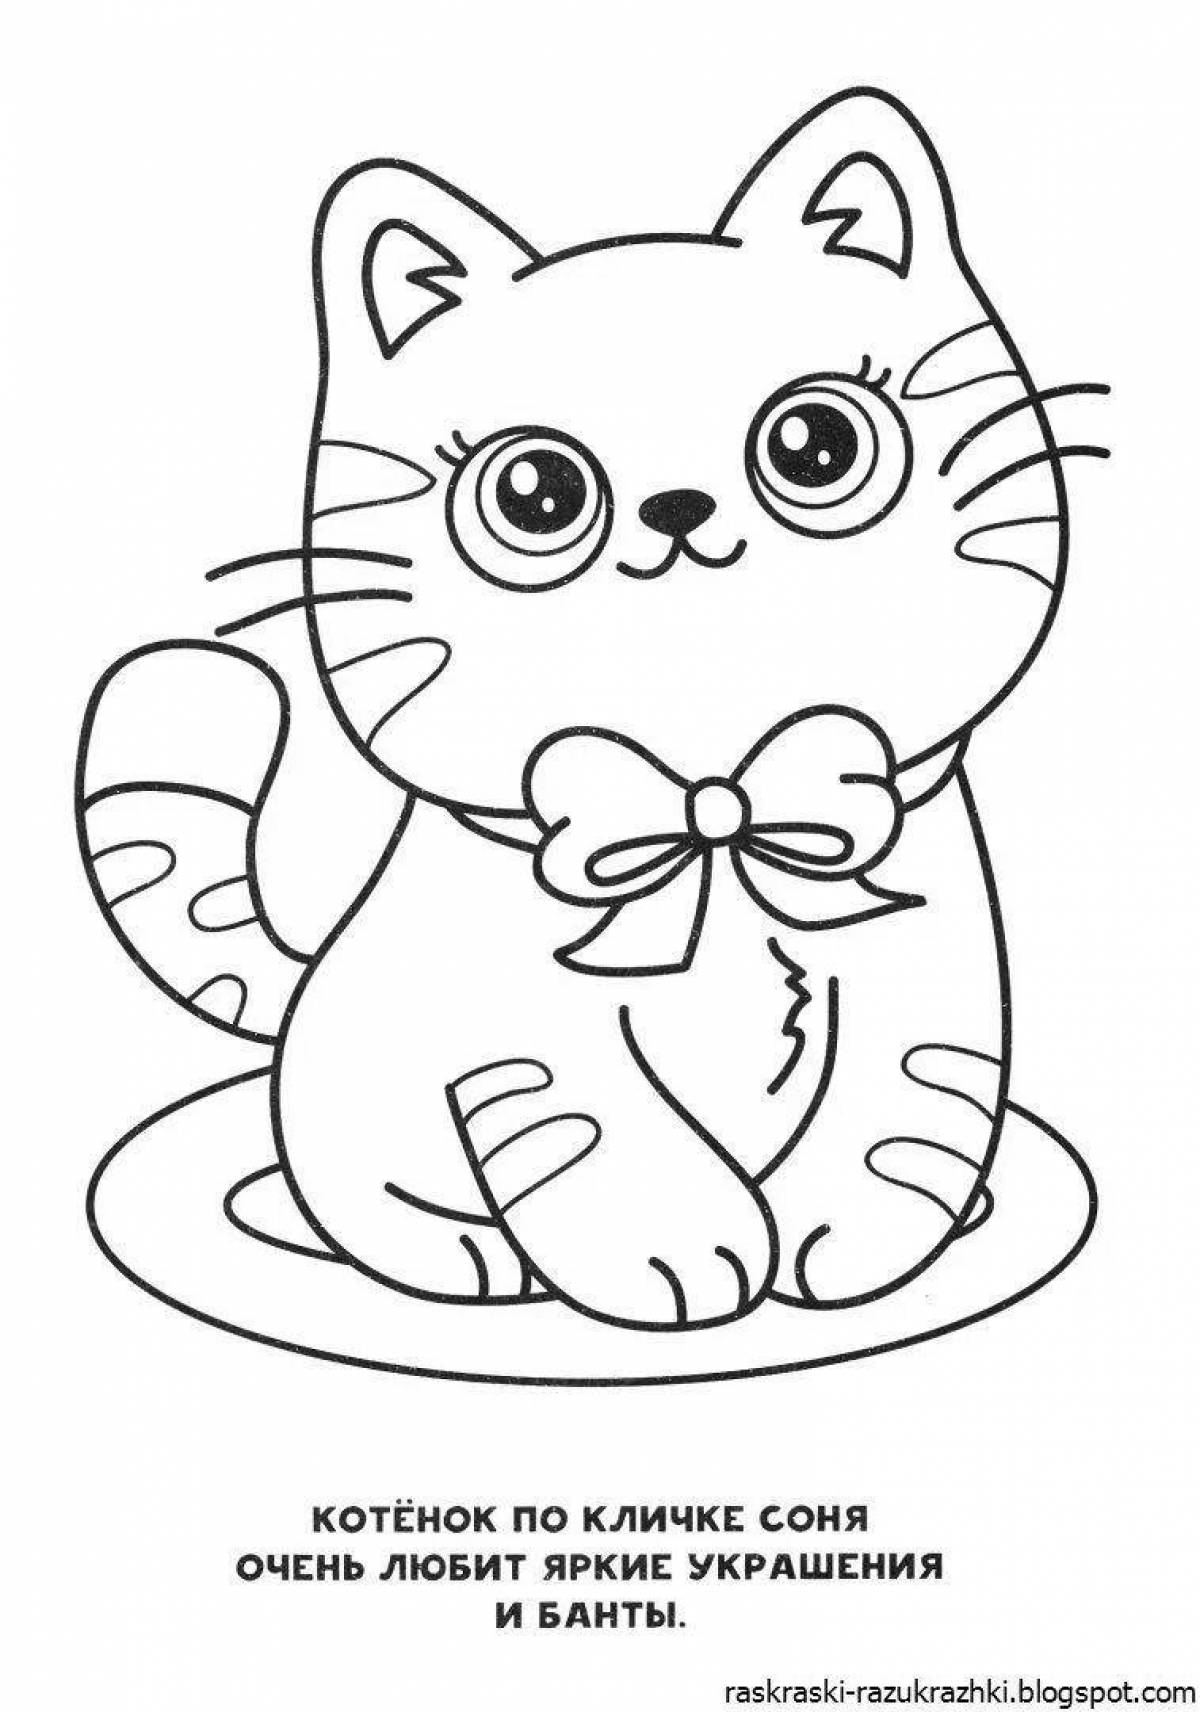 Incredible kitten coloring book for kids 5-6 years old